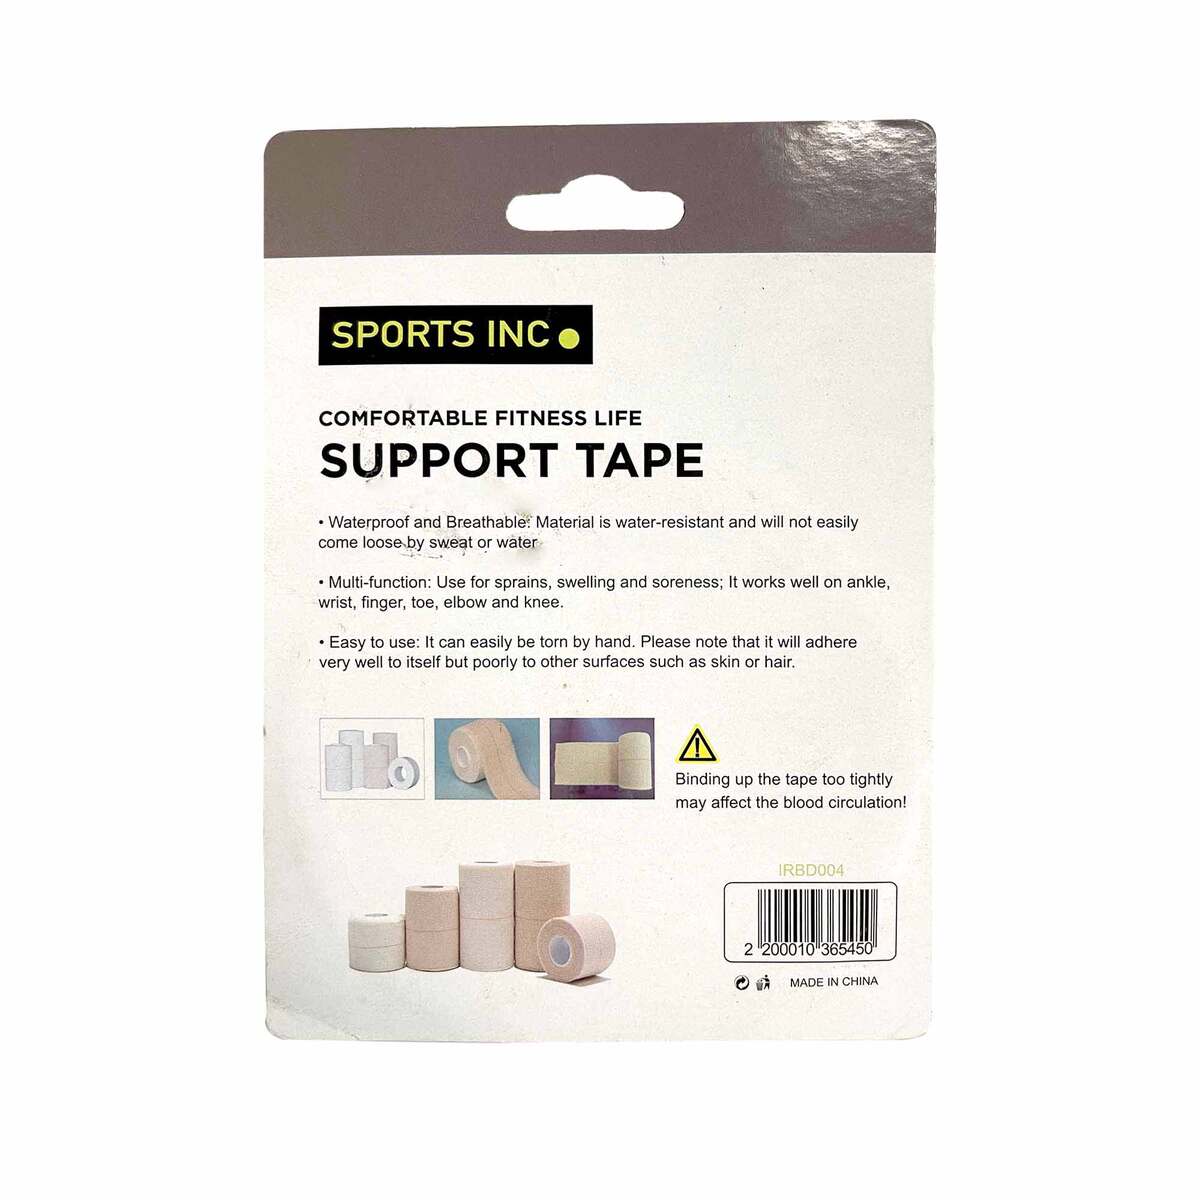 Sports INC Support Tape IRBD004, Size: 5cmx4.5m